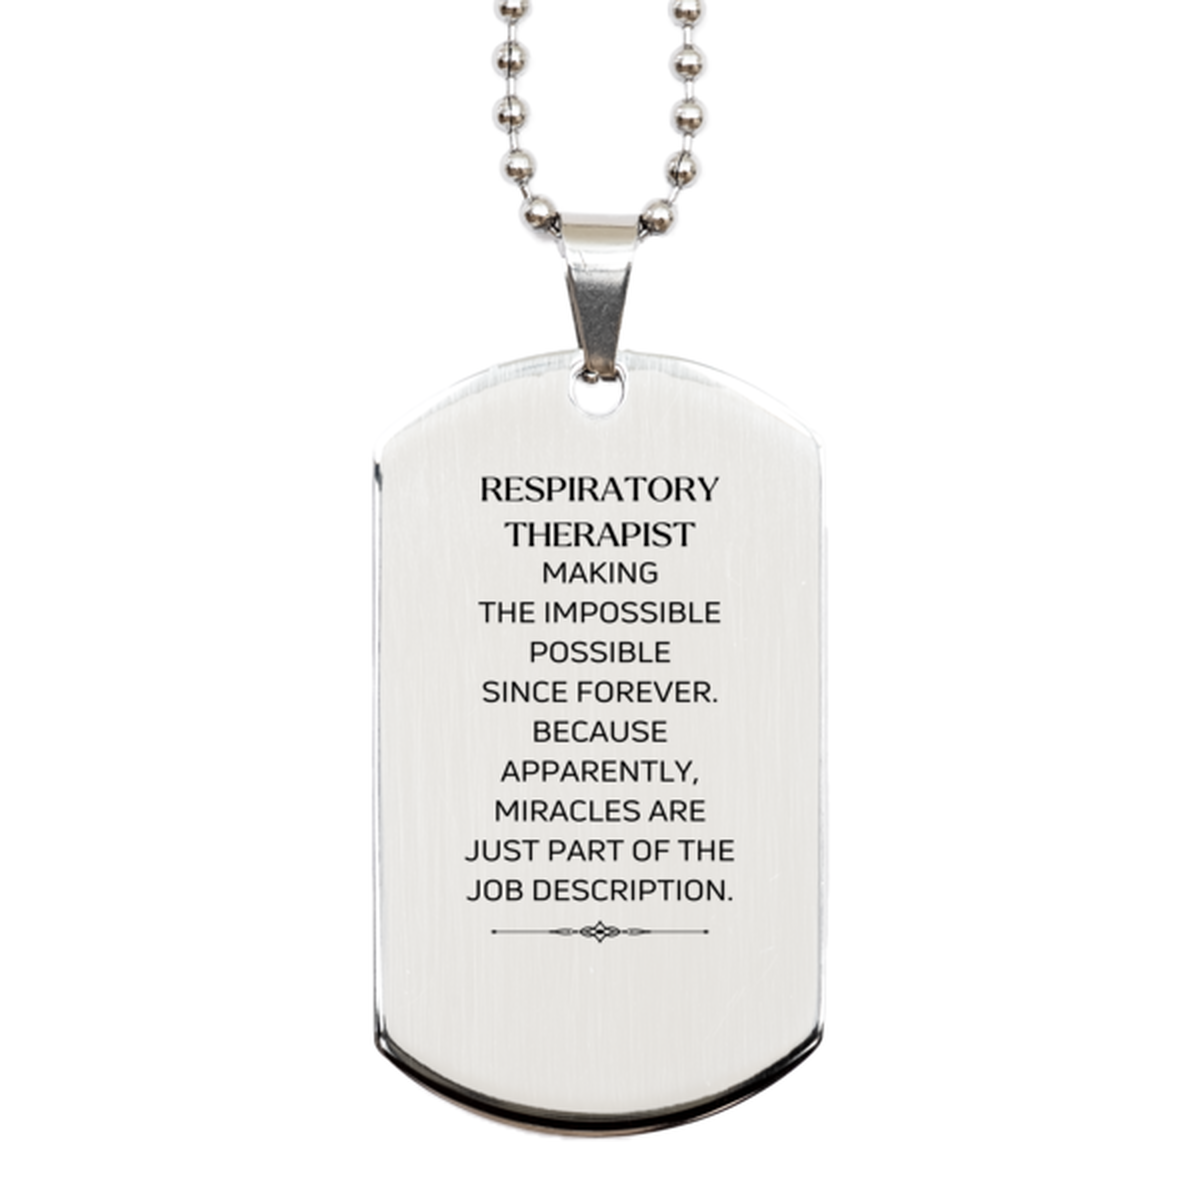 Funny Respiratory Therapist Gifts, Miracles are just part of the job description, Inspirational Birthday Silver Dog Tag For Respiratory Therapist, Men, Women, Coworkers, Friends, Boss